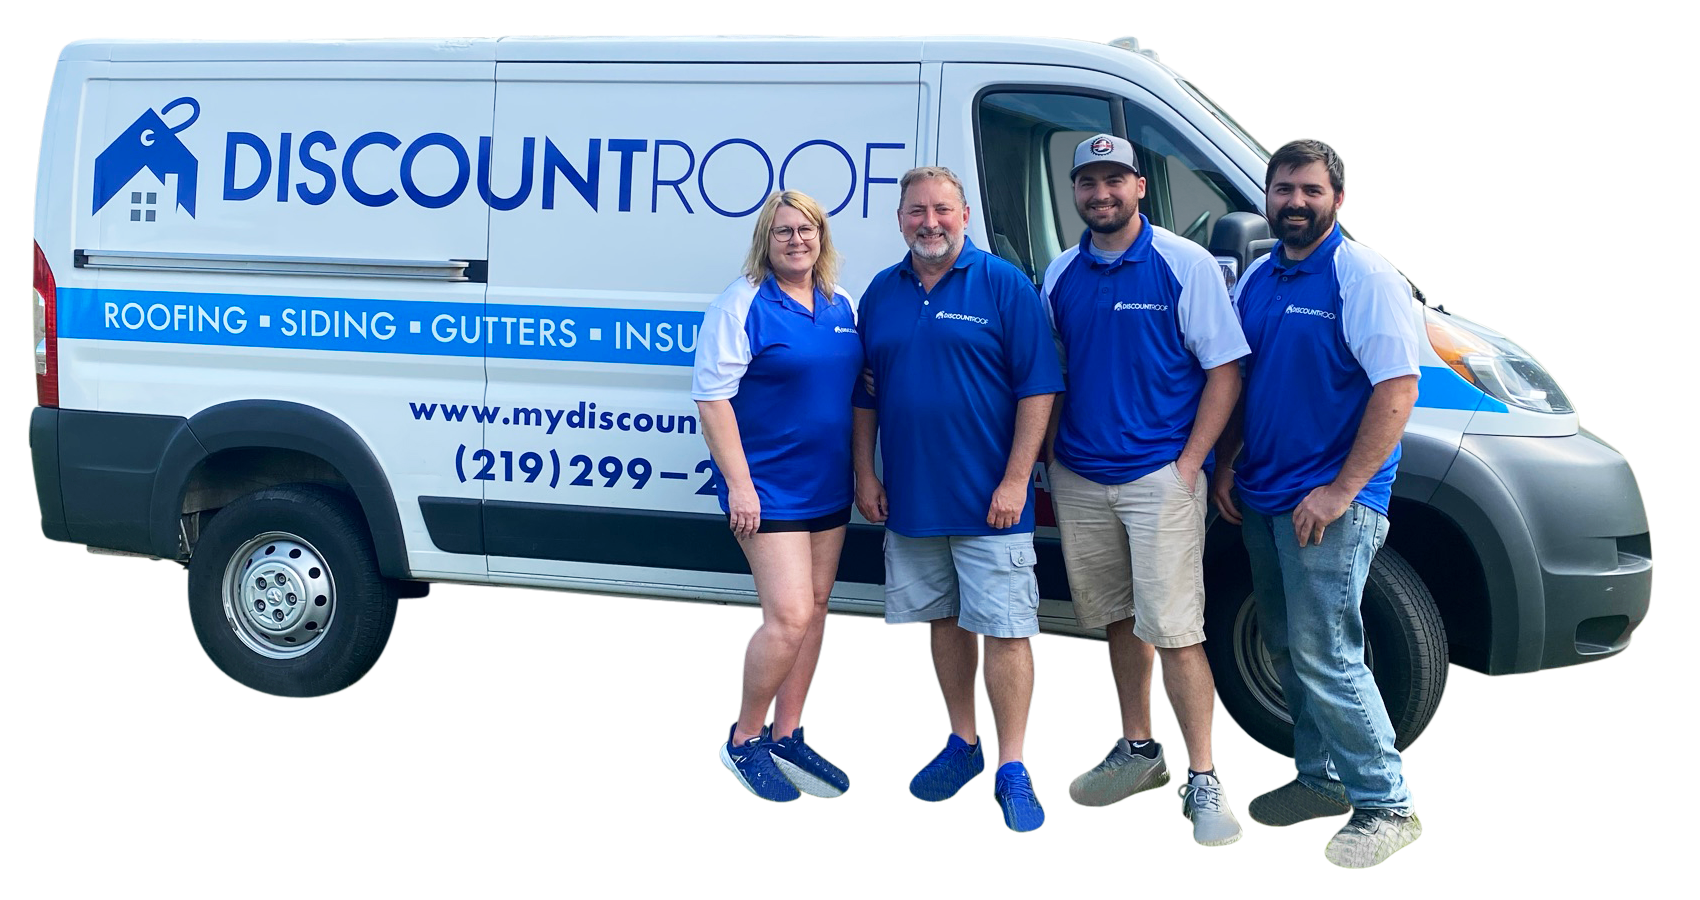 van; Call Discount Roof for your roofing estimates